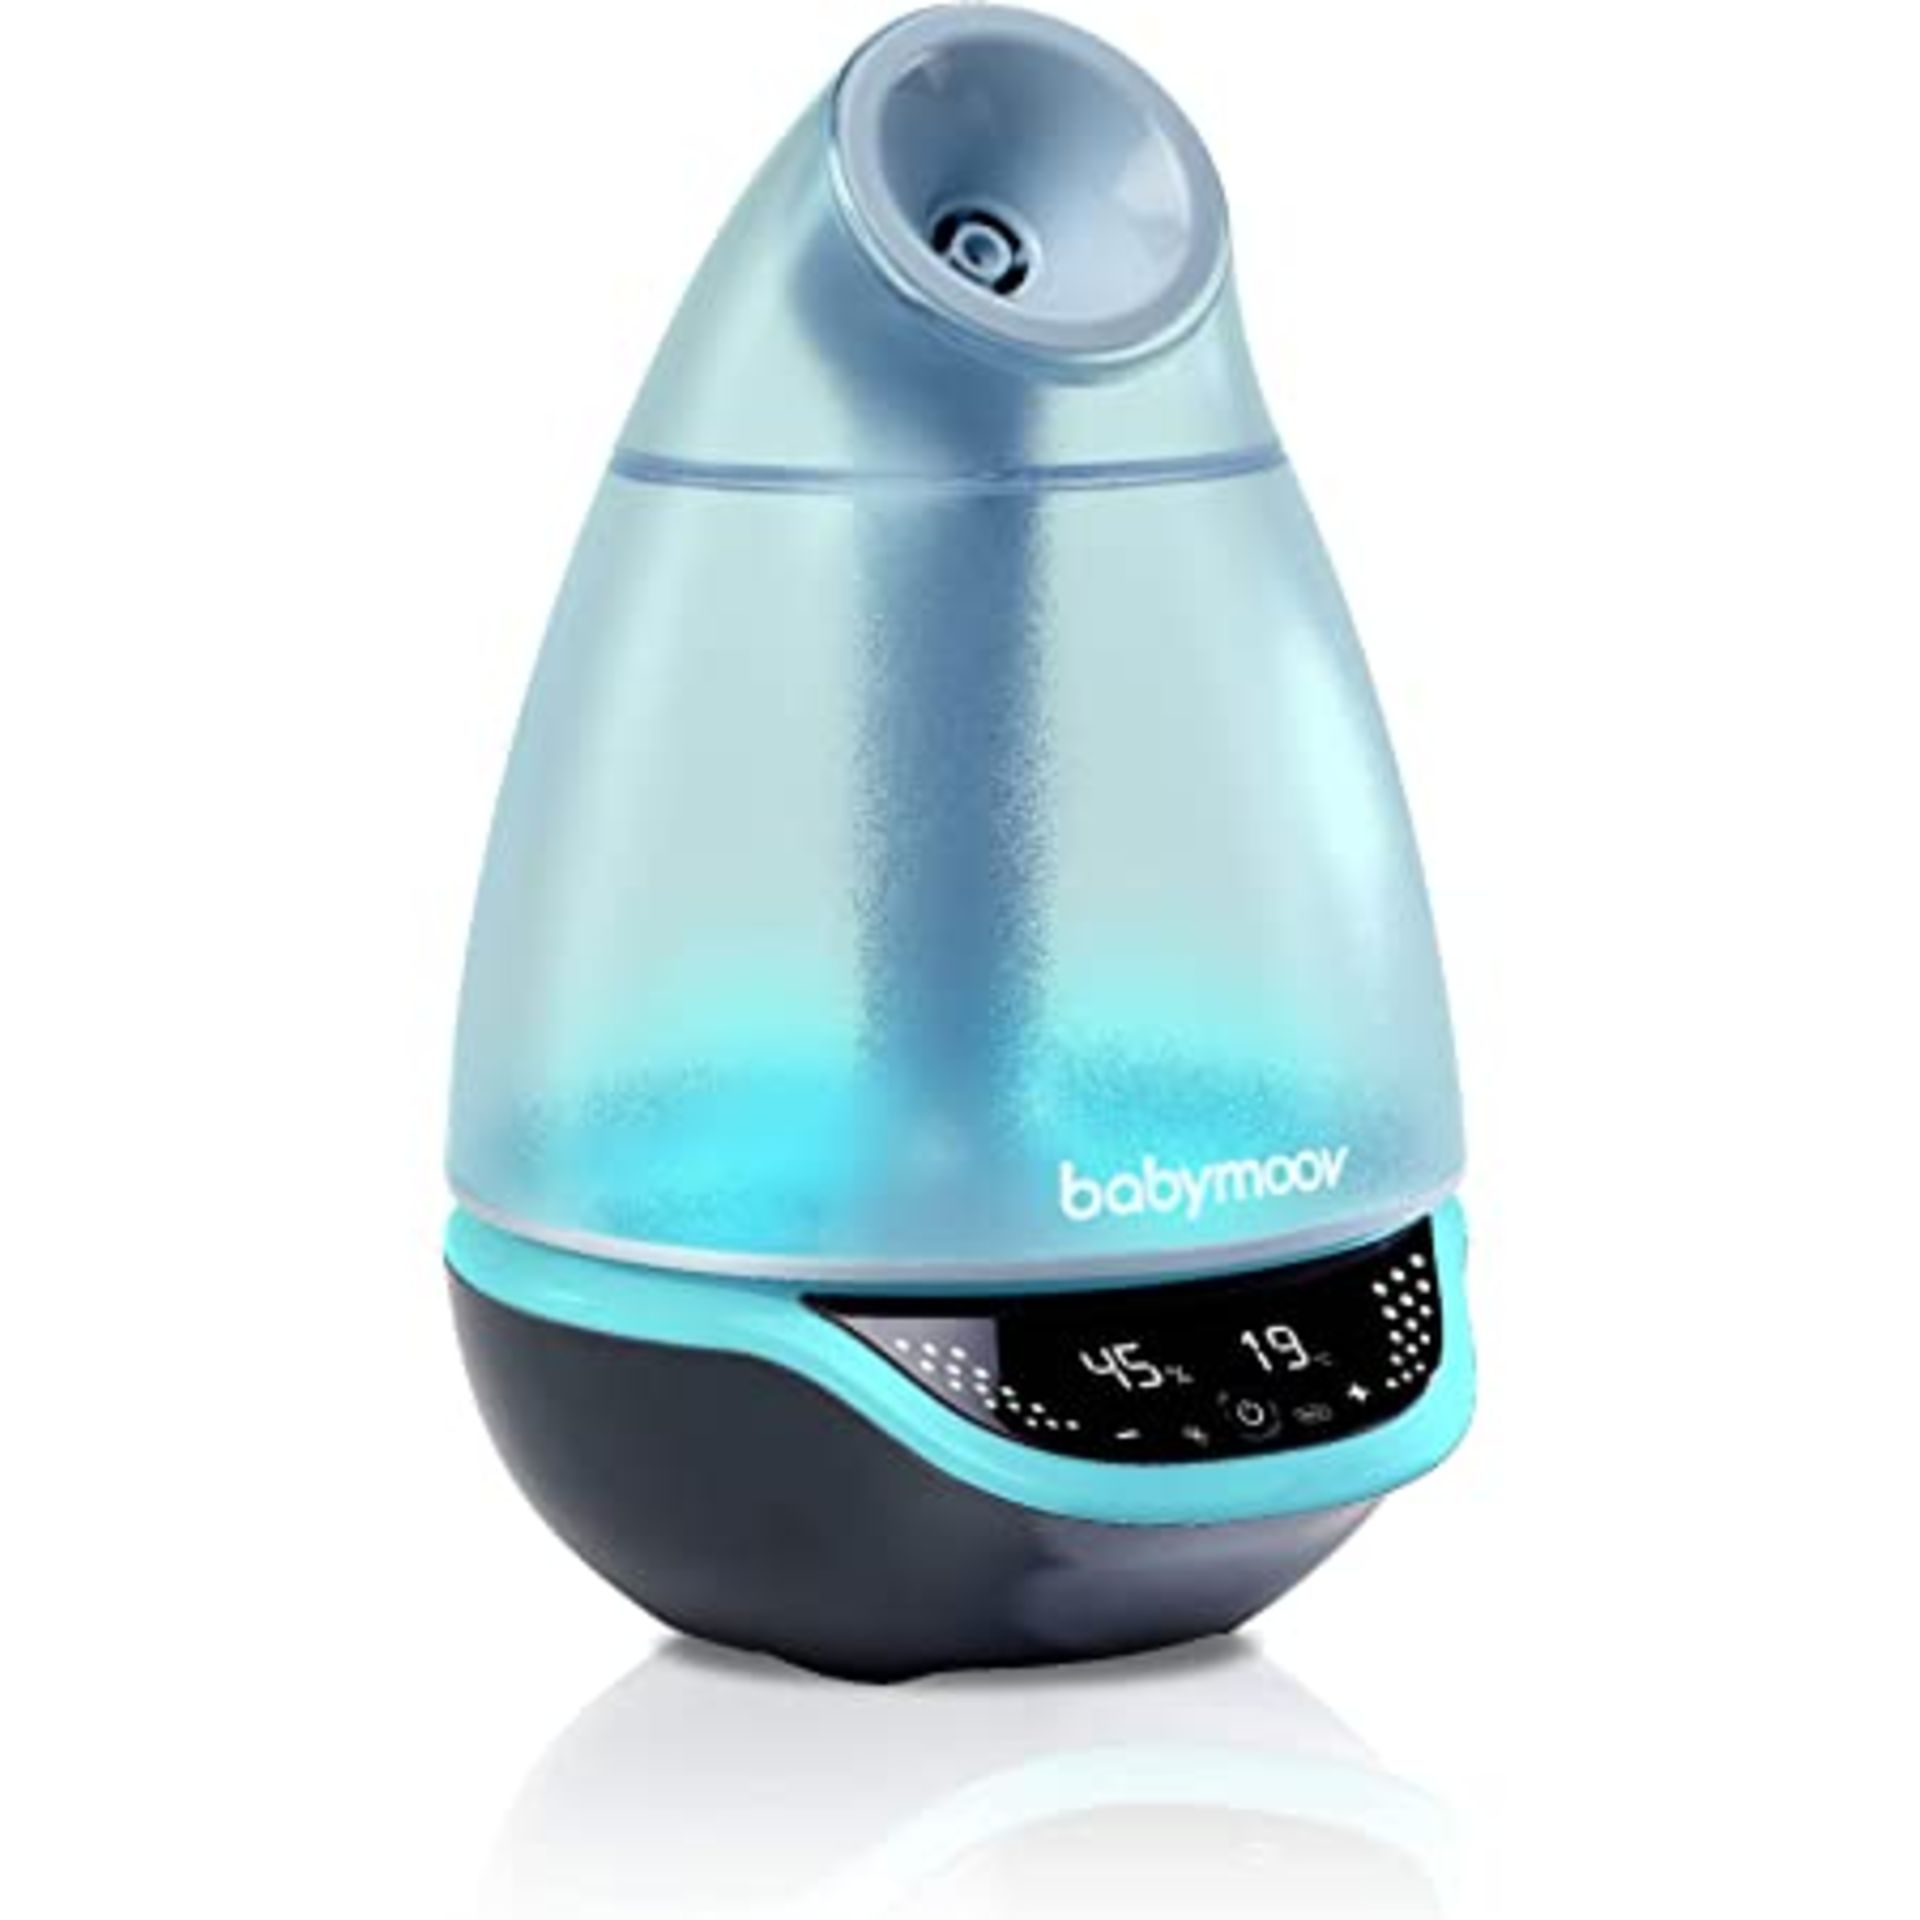 RRP-£90 Babymoov Hygro Plus Humidifier for Baby, Ultrasonic Cool Mist Baby Humidifier with Night Lig